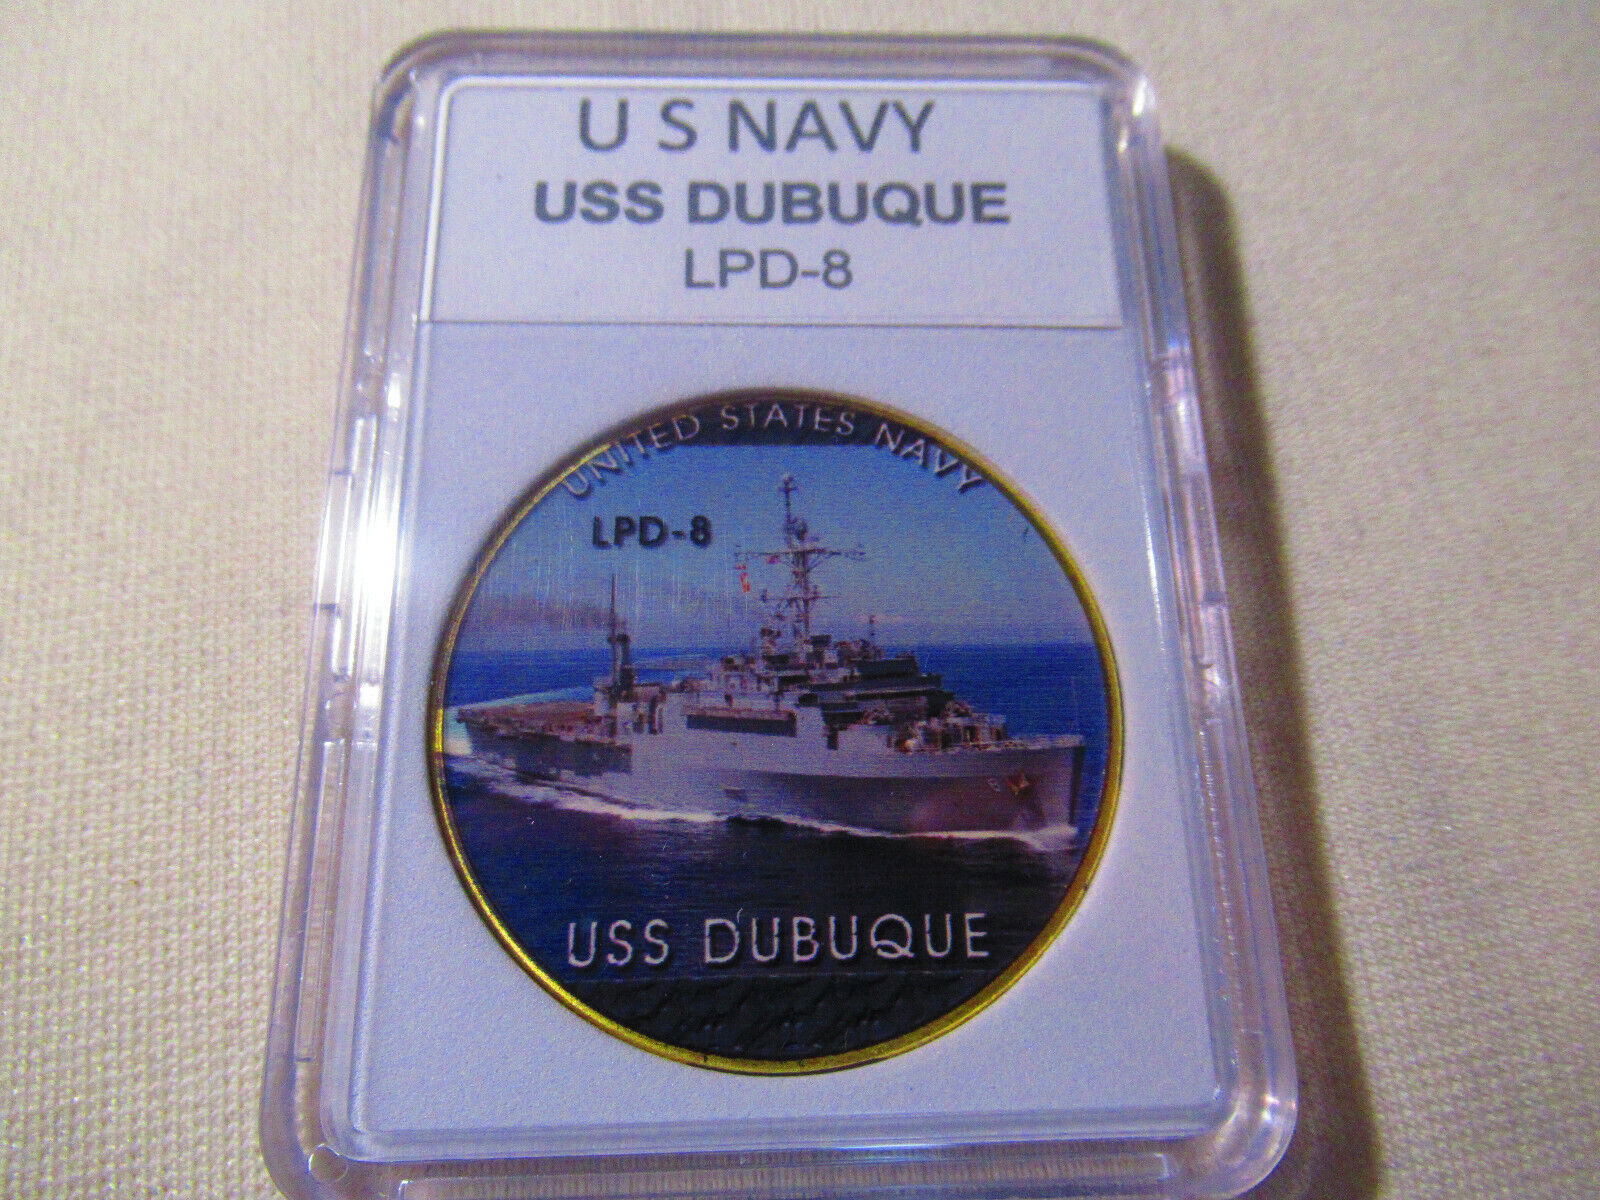 US NAVY - USS Dubuque (LPD-8) Challenge Coin